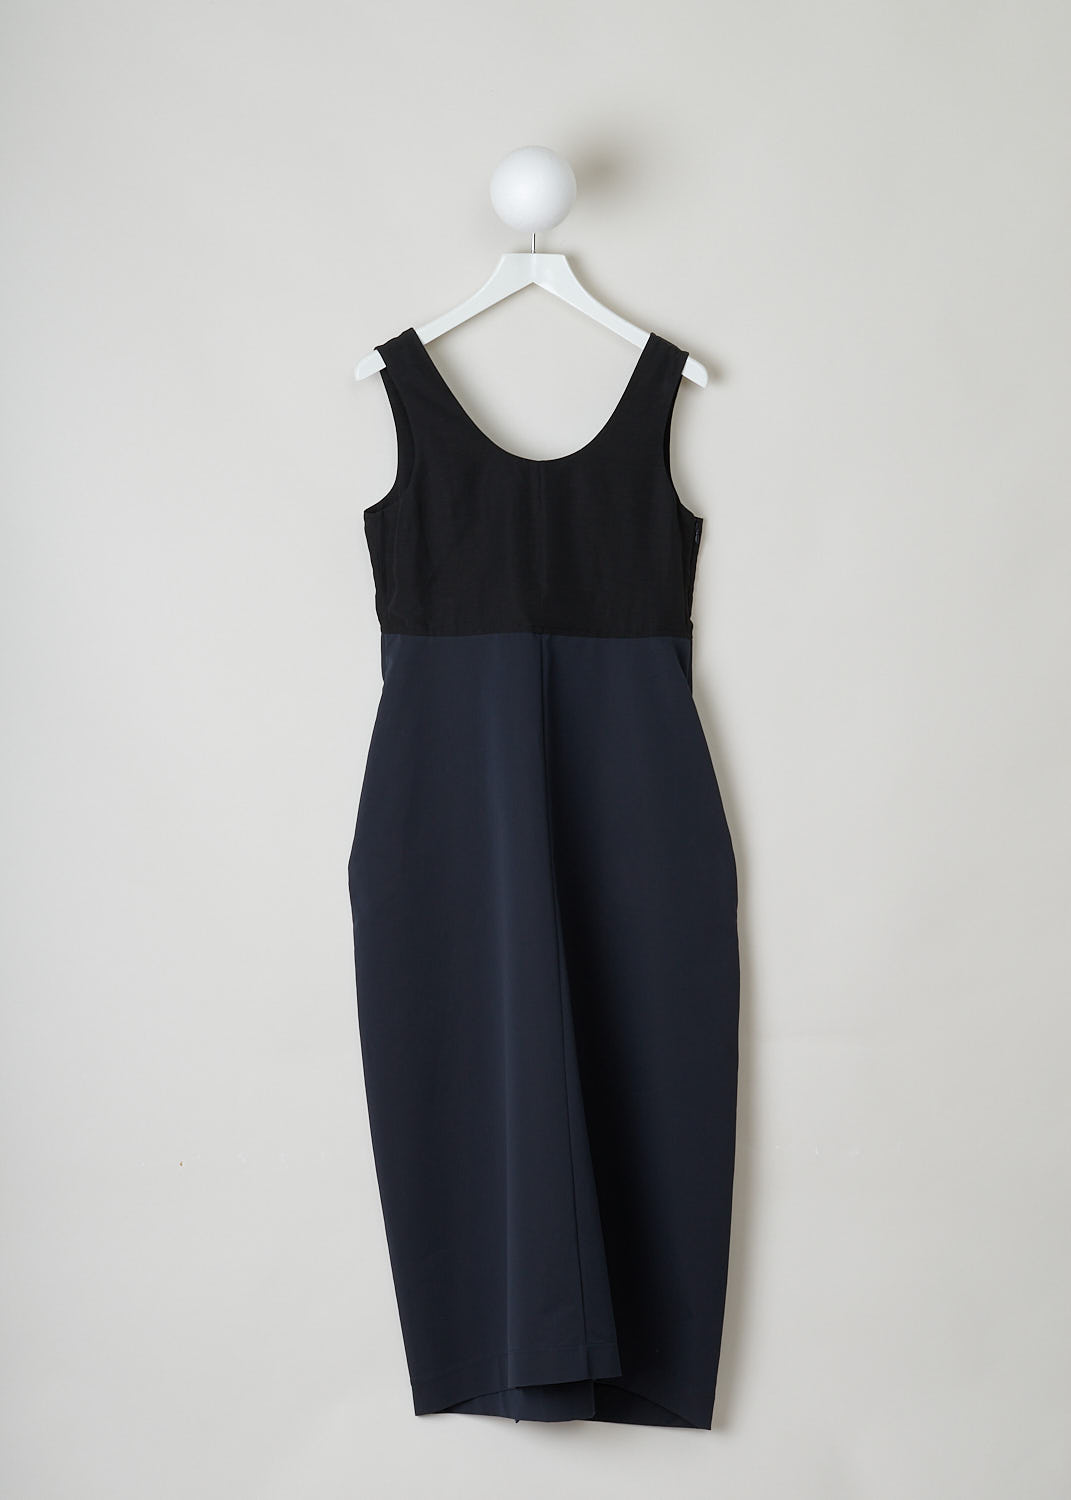 JIL SANDER, TWO-TONE SHIFT DRESS, JSWO507756_WO251400C_402, Black, Blue, Front, This two-tone sleeveless dress has an empire style silhouette with a black bodice and an elongated dark blue skirt. Slant pockets are concealed in in the side seam. In the back, a centre slit can be found. 
